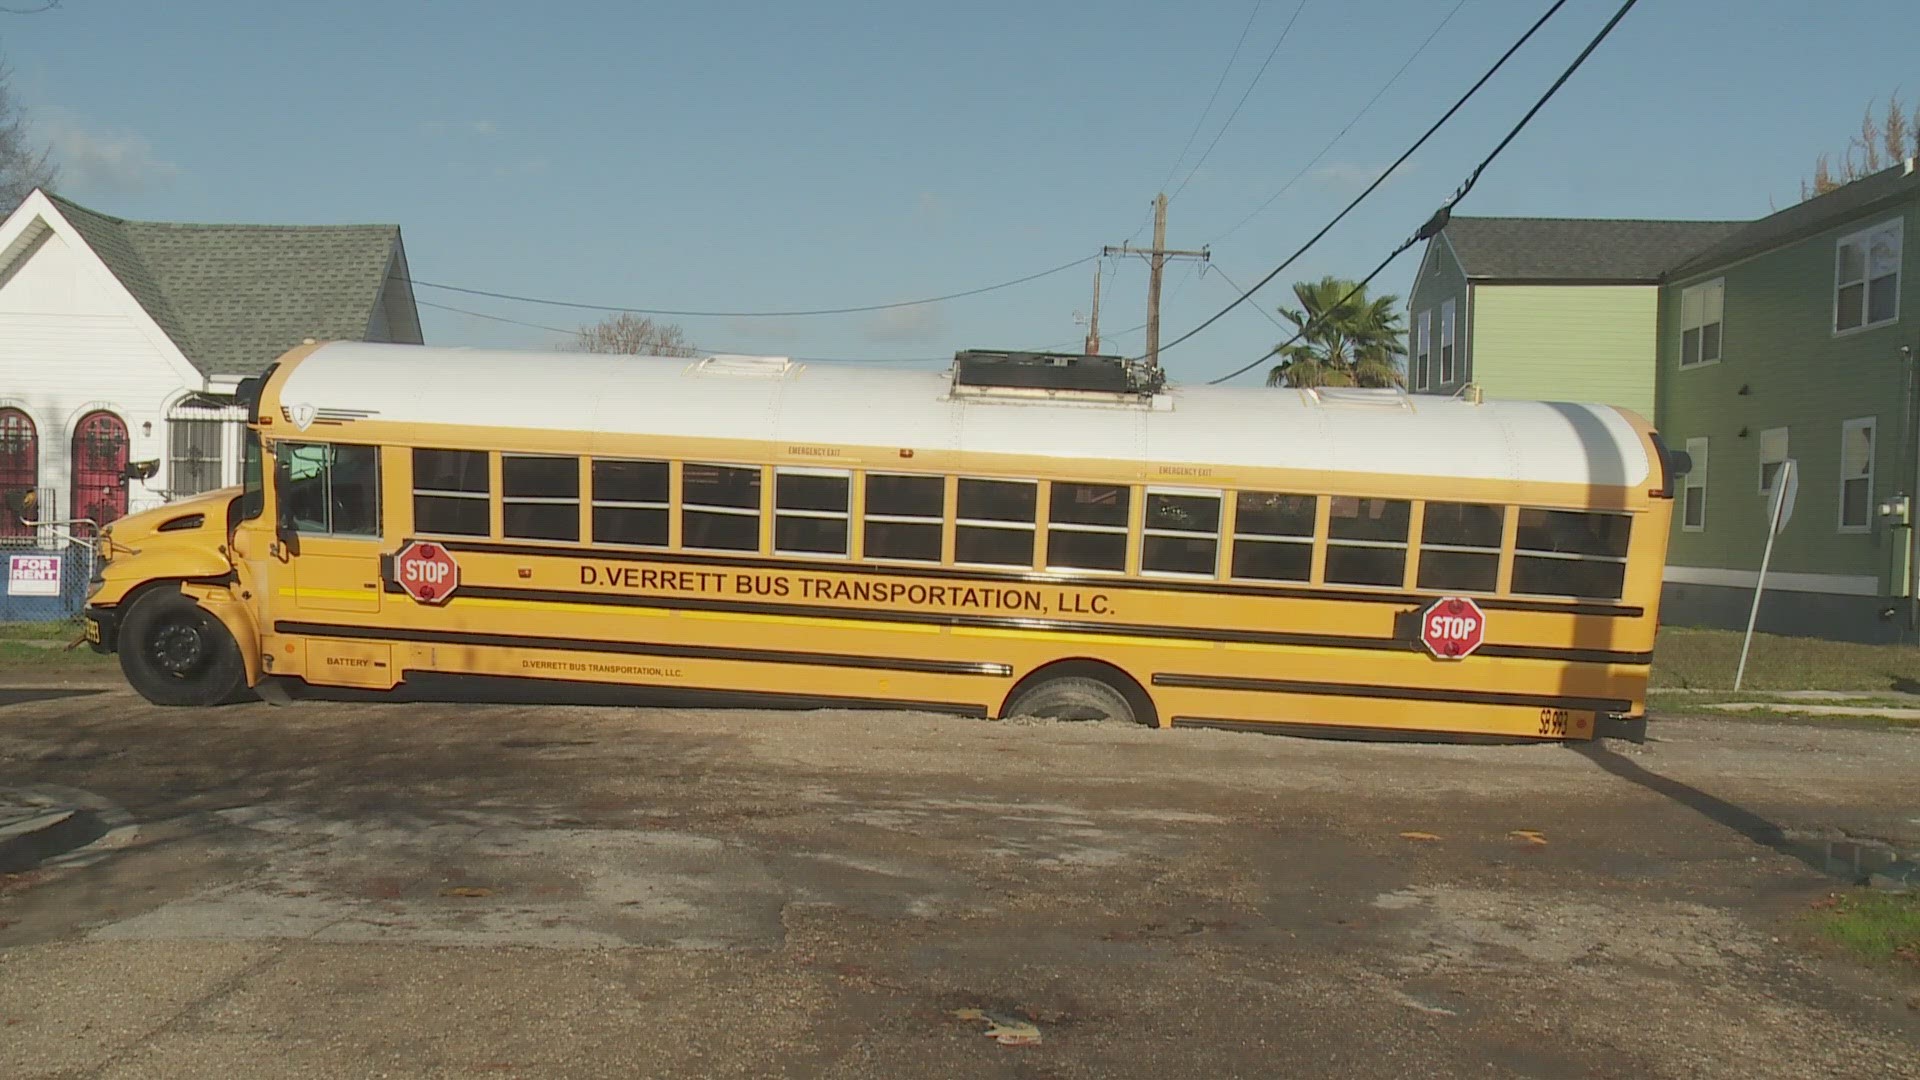 Parents expect their children to be kept safe when they're riding a school bus. They don't expect to see the bus stuck in a collapsed roadway in the city.